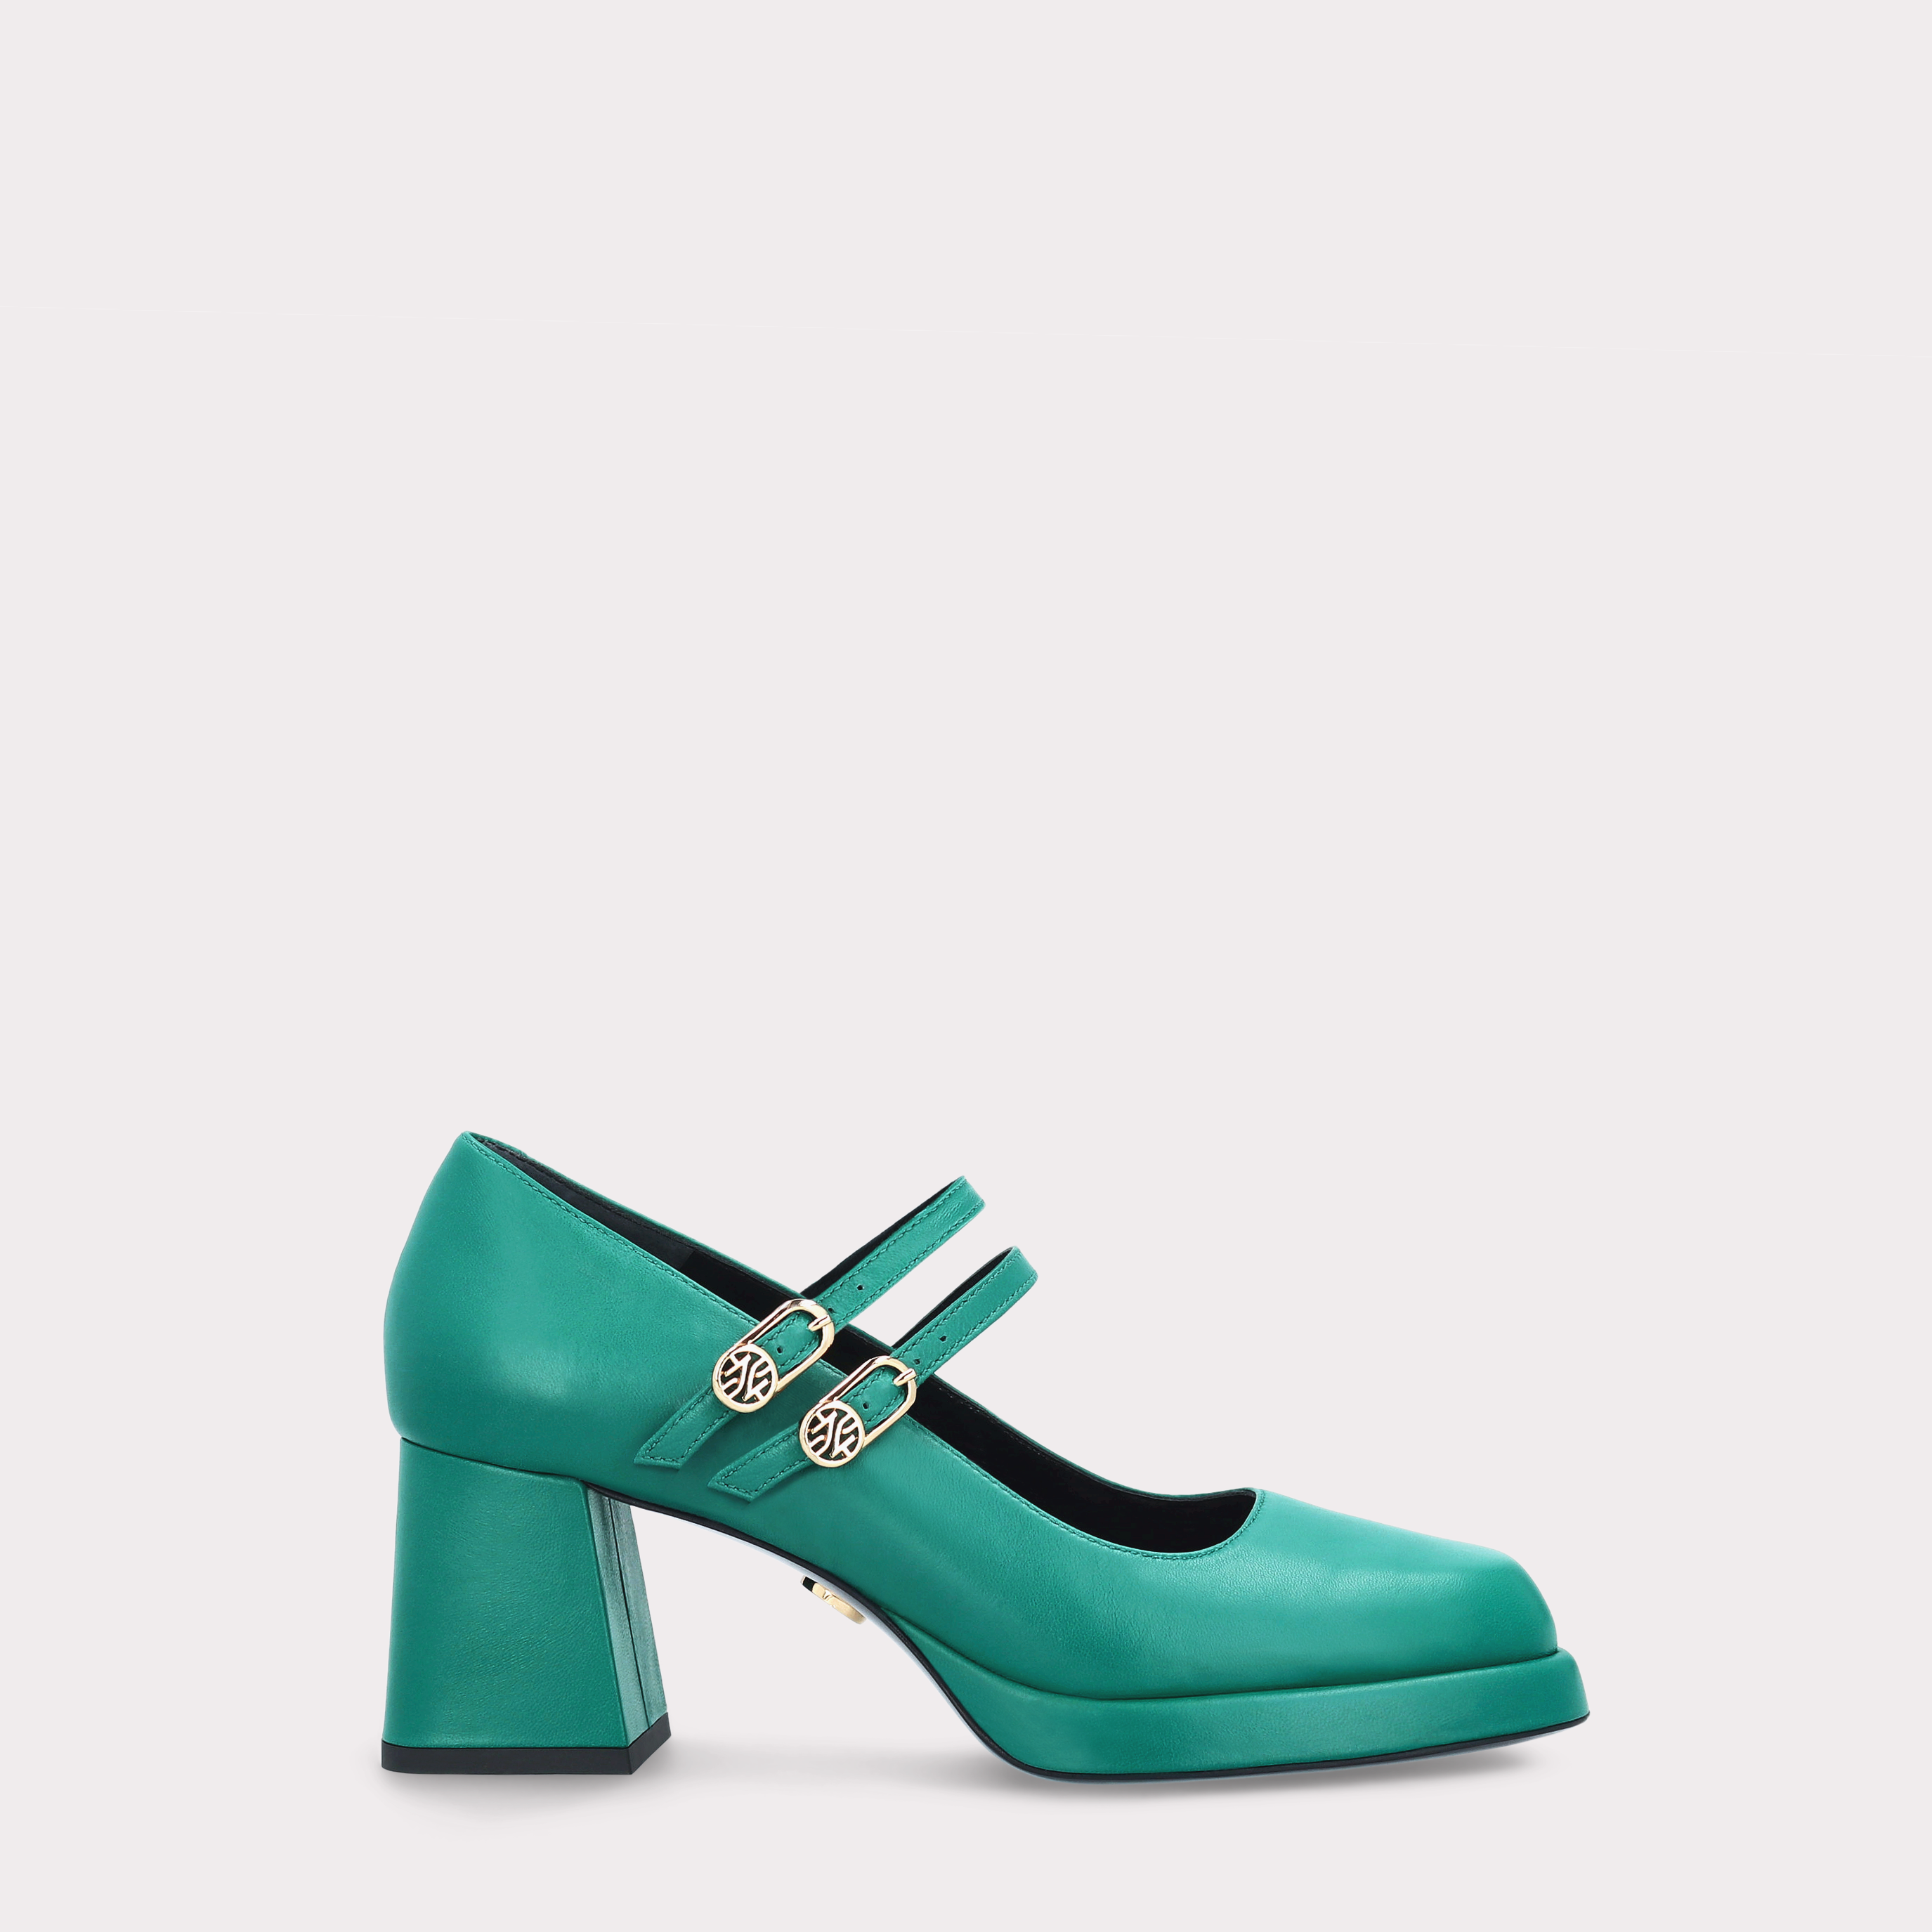 CONNIE BEBE 01 GREEN SMOOTH LEATHER PLATFORM PUMPS